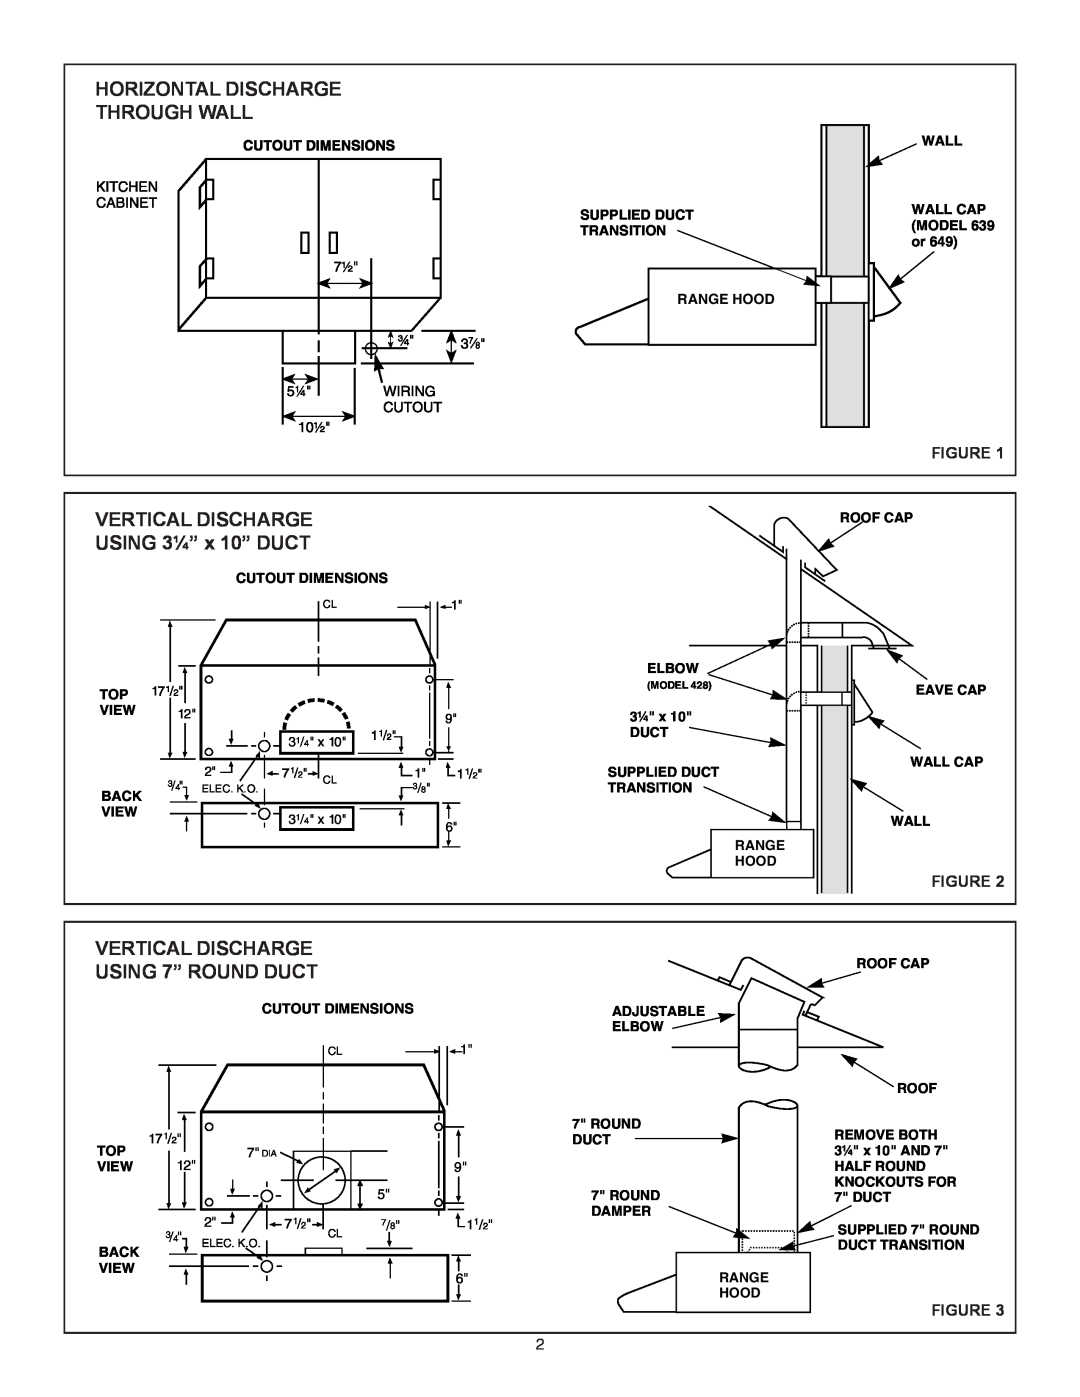 Broan QT230SS installation instructions Horizontal Discharge Through Wall, VERTICAL DISCHARGE USING 3¼” x 10” DUCT 